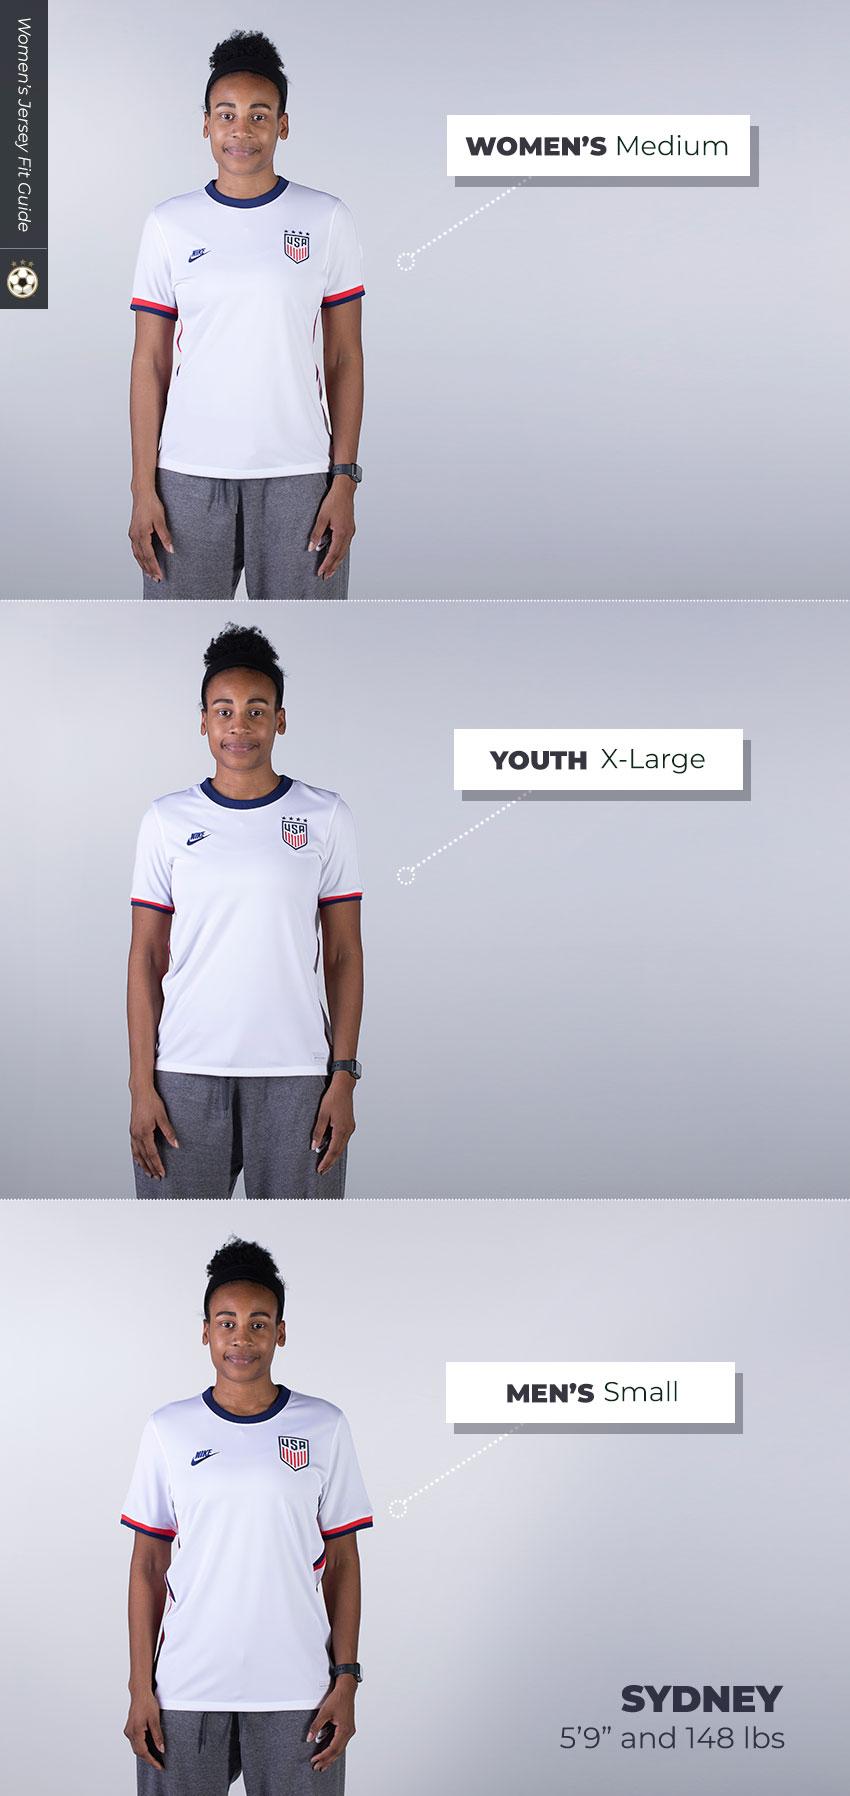 Soccer Jersey Sizing Guide